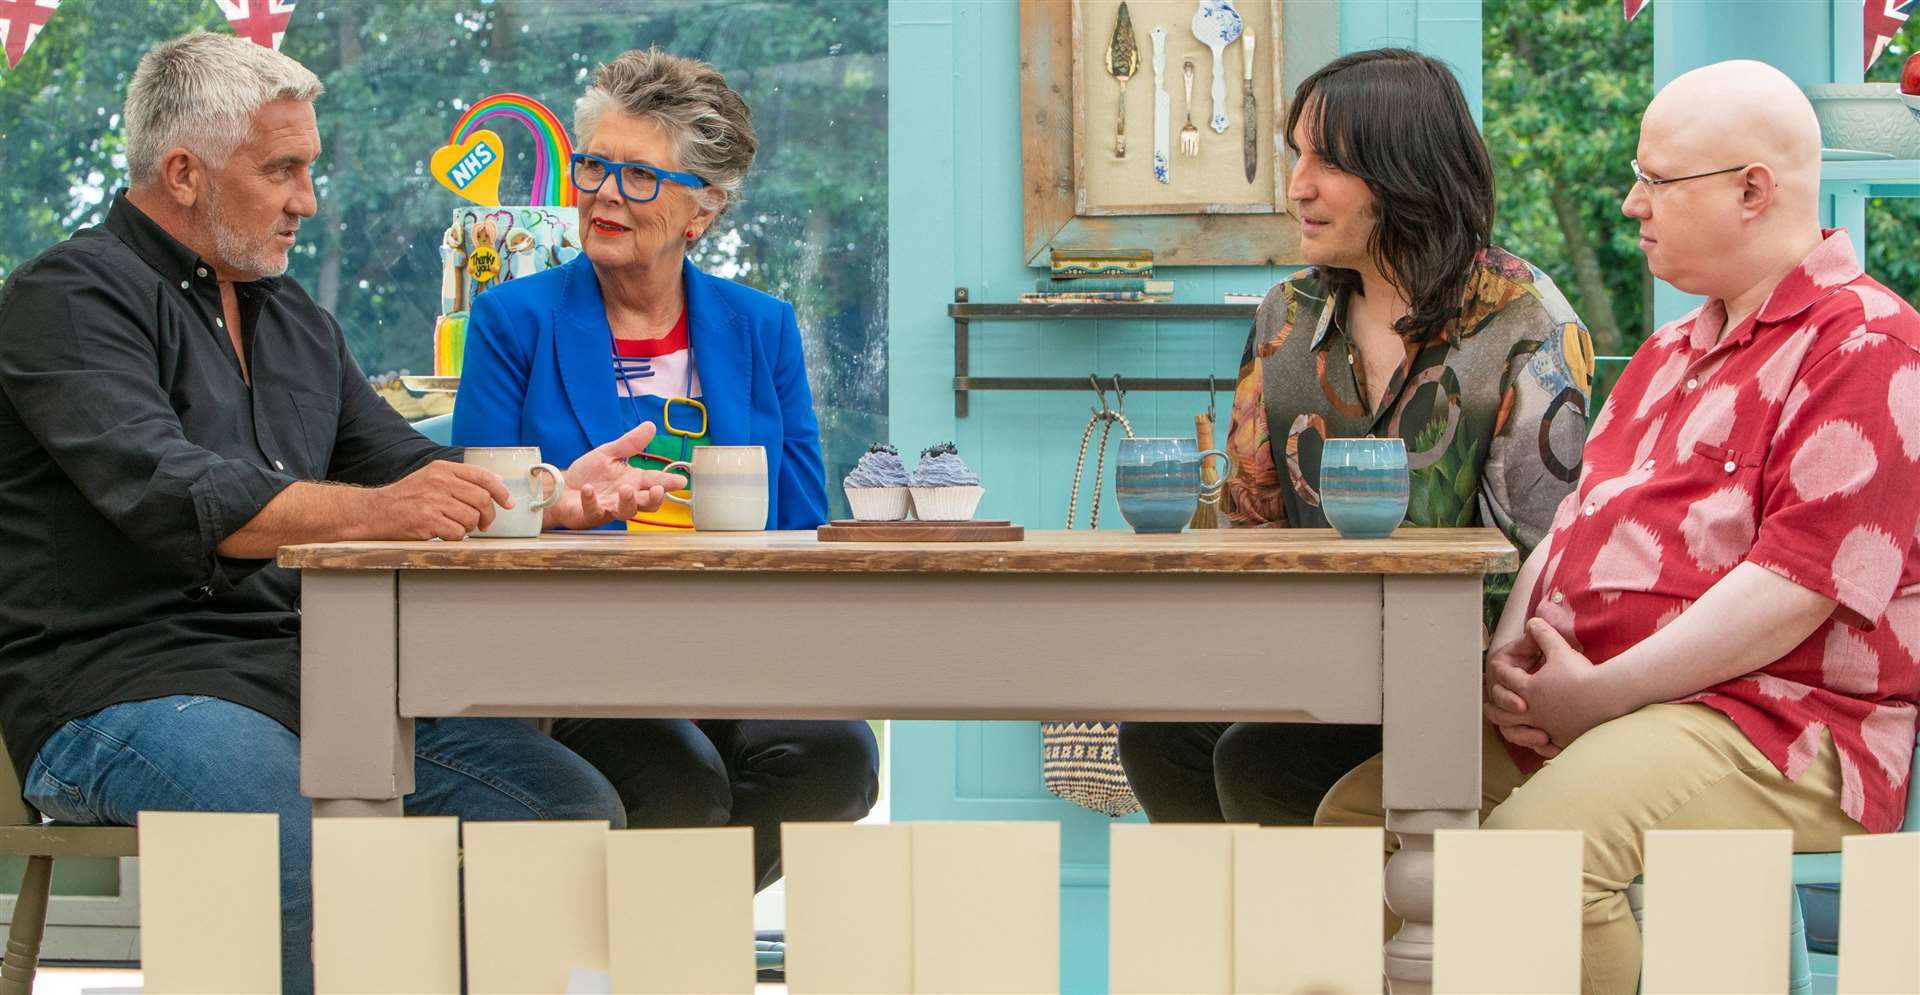 Bake off is back tonight, with judges Paul Hollywood and Prue Leith as well as presenters Noel Fielding and Matt Lucas. Picture: PA Photo/ Channel 4 Television